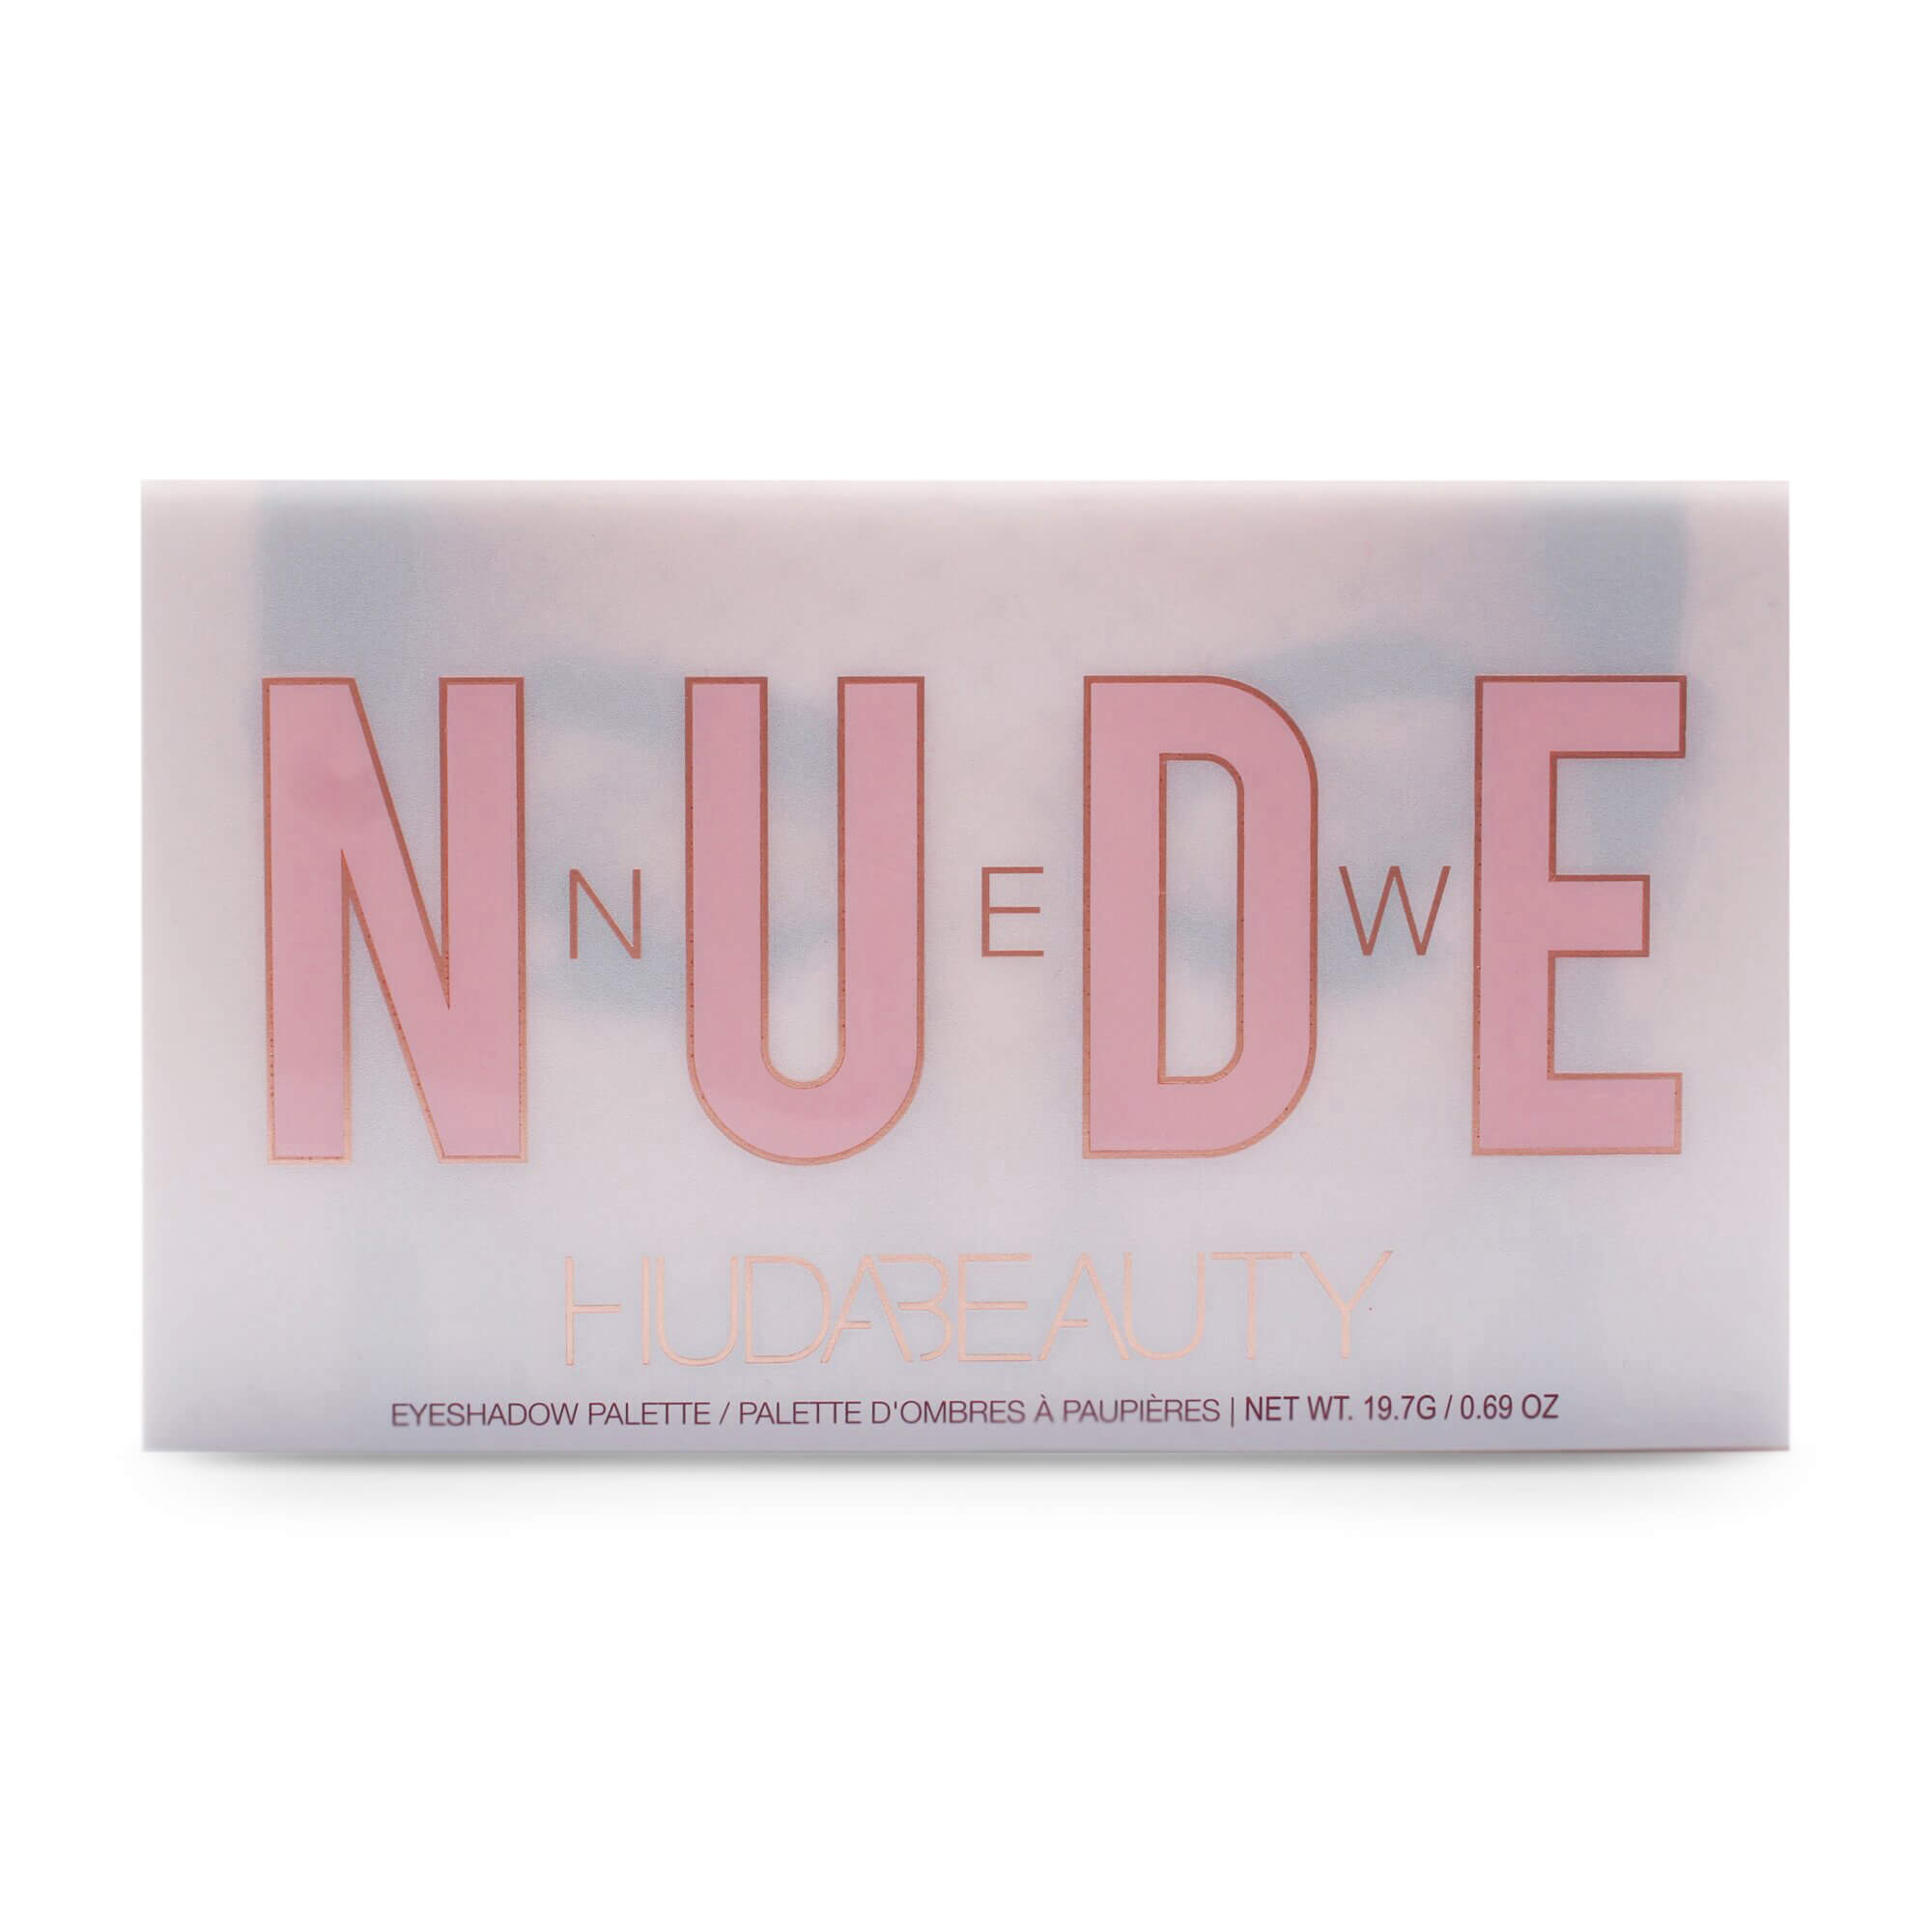 The new nude eyeshadow palette